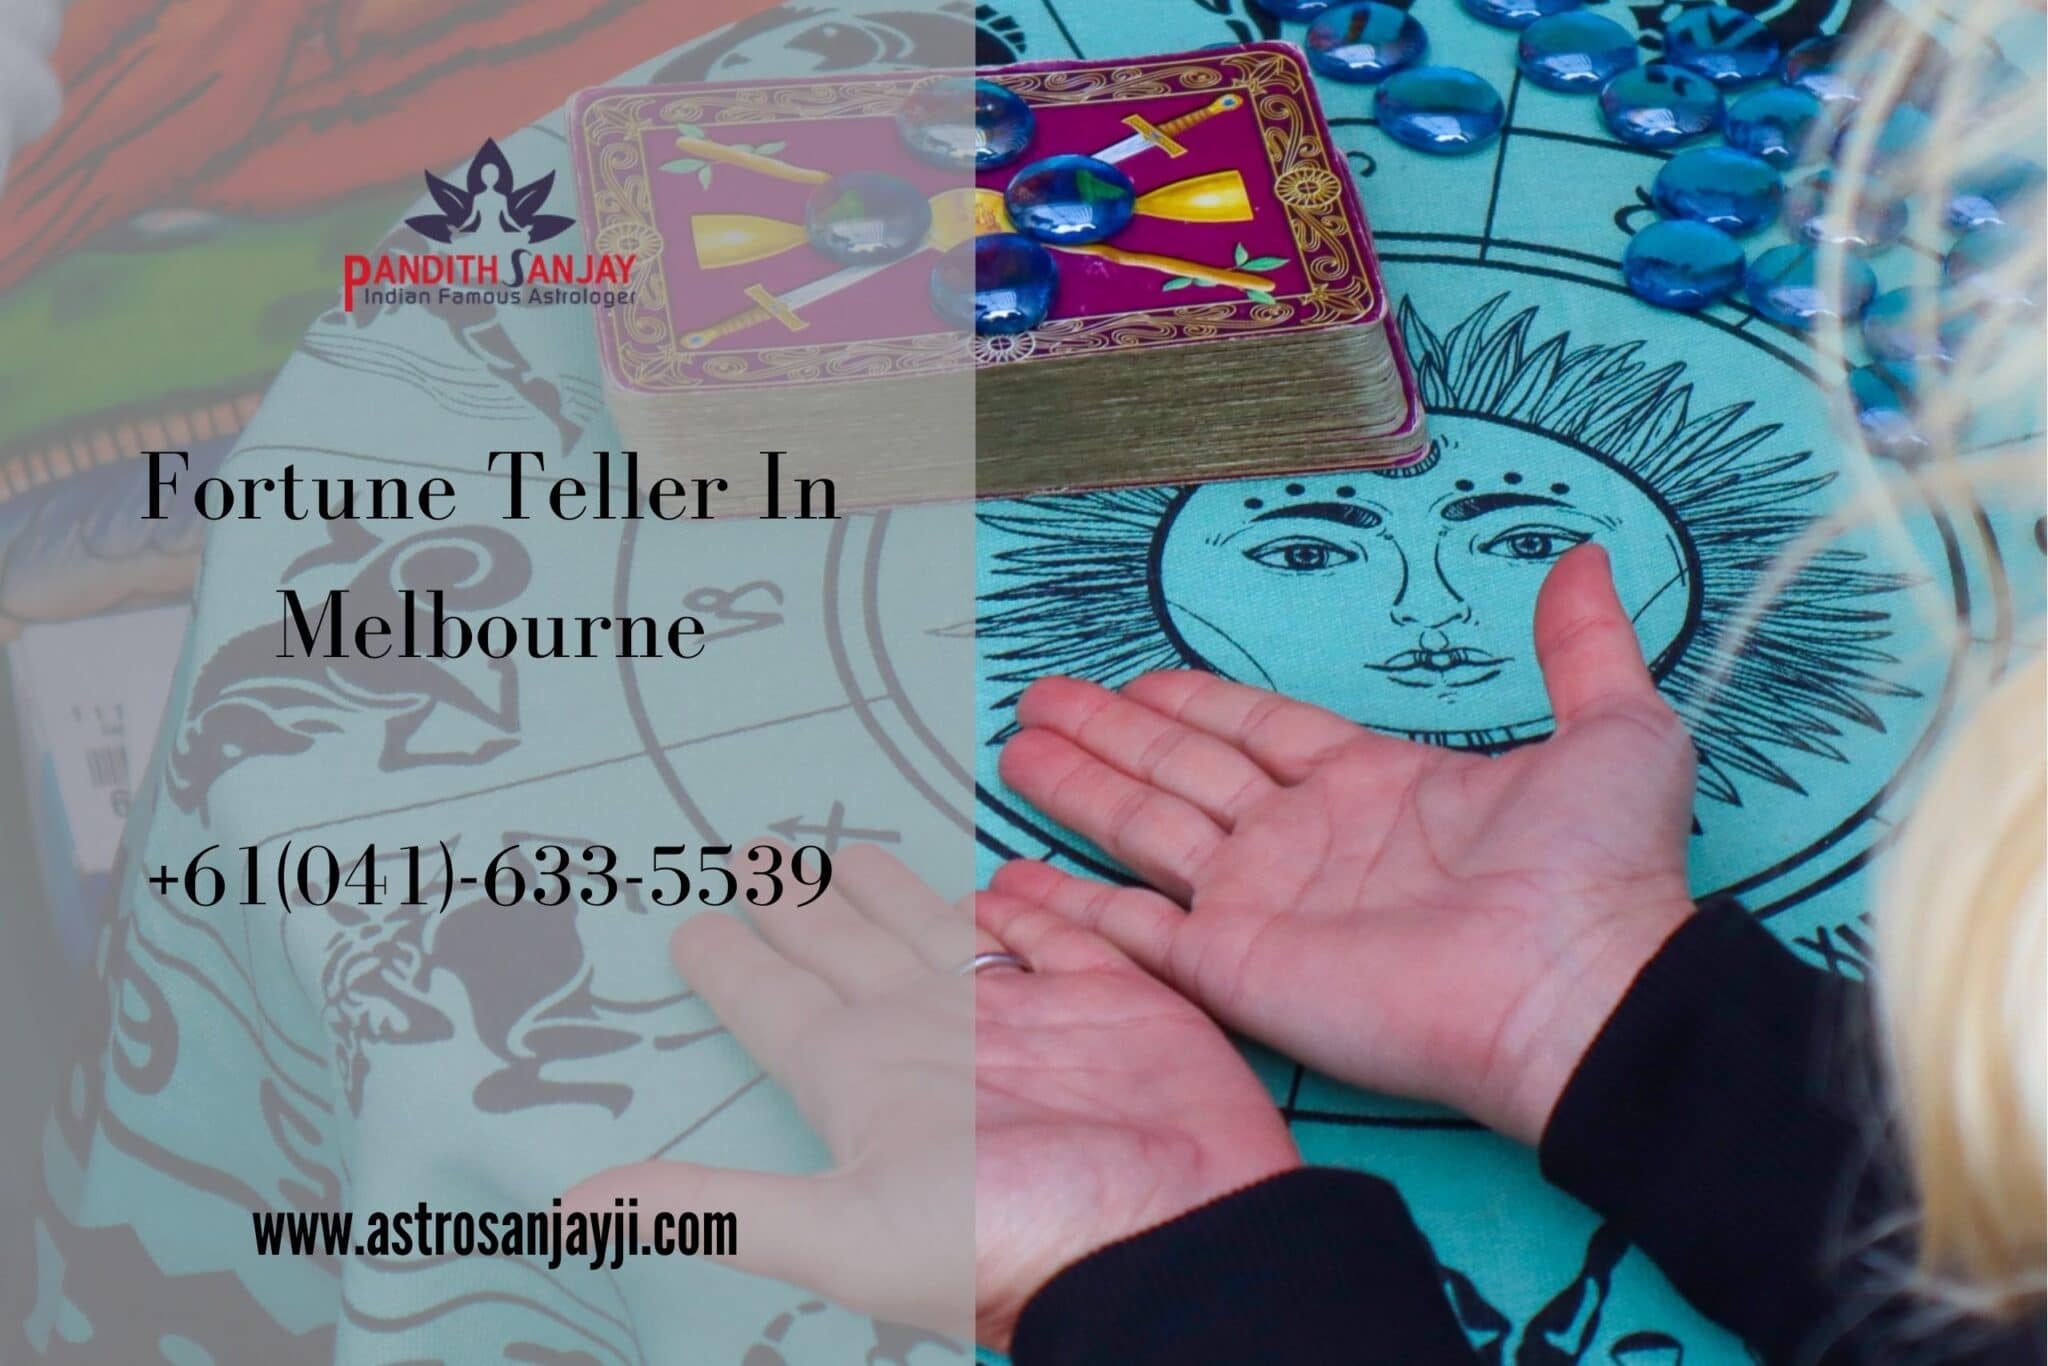 Meet The Top Fortune Teller In Melbourne-03b67ad4